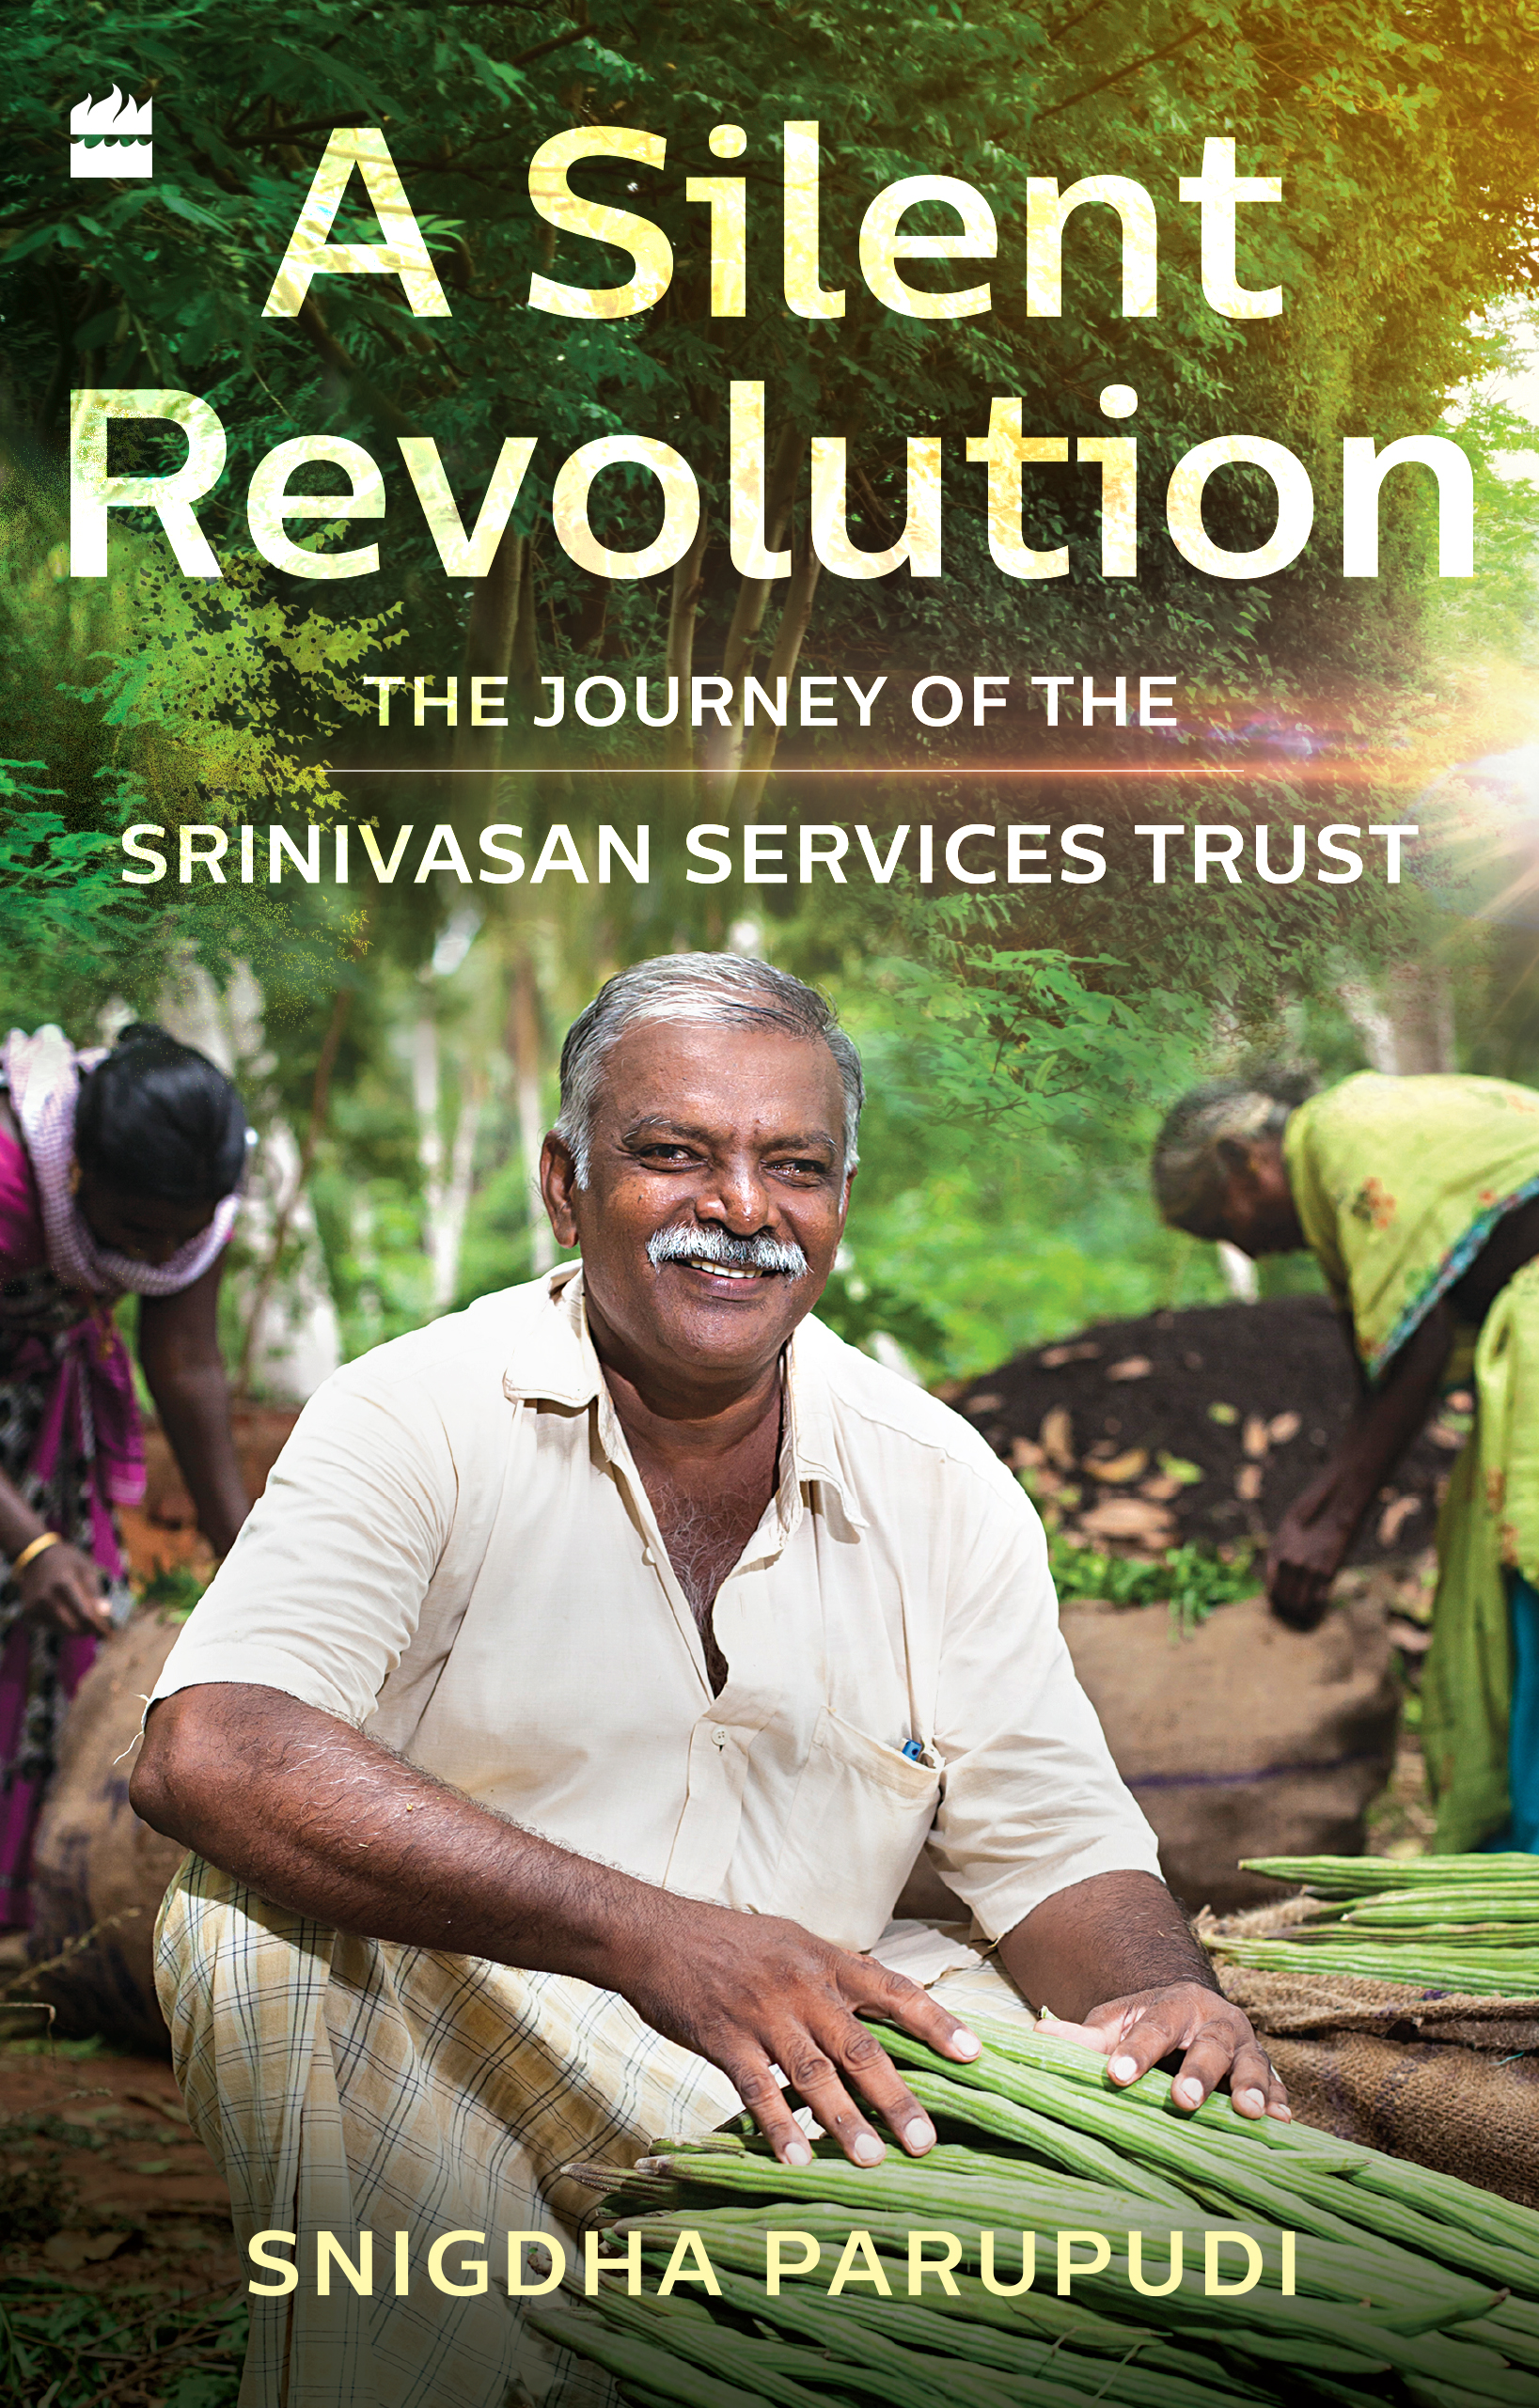 TVS Motor Company releases ‘A Silent Revolution’, a book to mark 25 years of Srinivasan Services Trust’s work in rural development decoding=